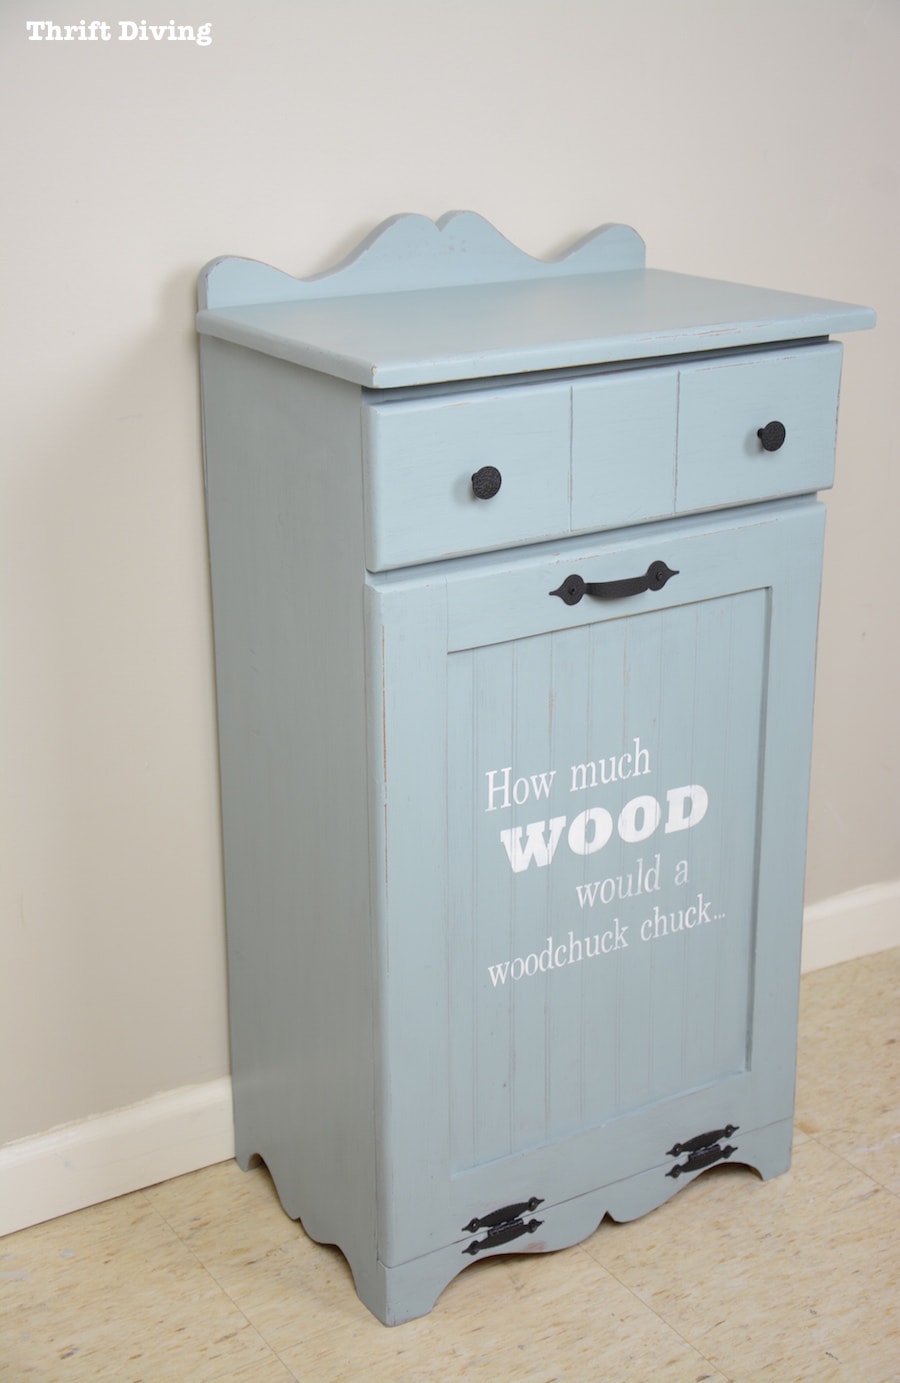 DIY Scrap Wood Trash Bin Makeover - An organized place for scrap wood for the garage